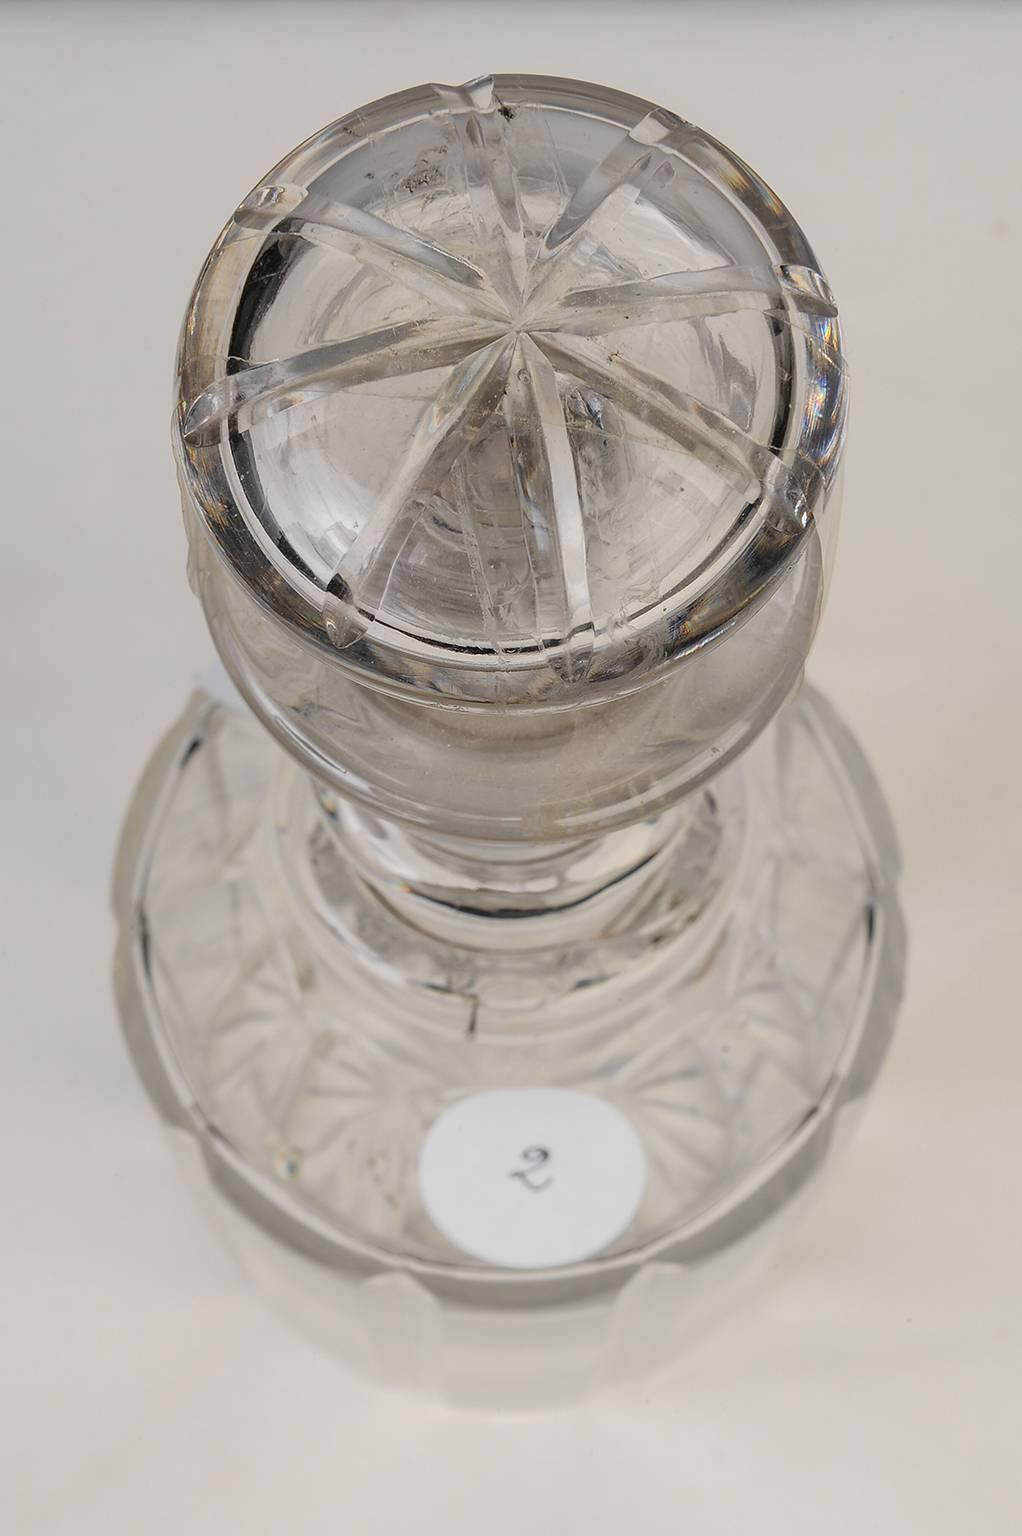 For Your bar corner or for table service:
N.1) O/3232 Old English decanter bottle. Measures: Diameter cm.10; height 24 cm. € 400
N.2) O/ 6554 Old English decanter bottle. Measures: 10, H. 26.                                 € 400
N.3) O/ 3237 Old